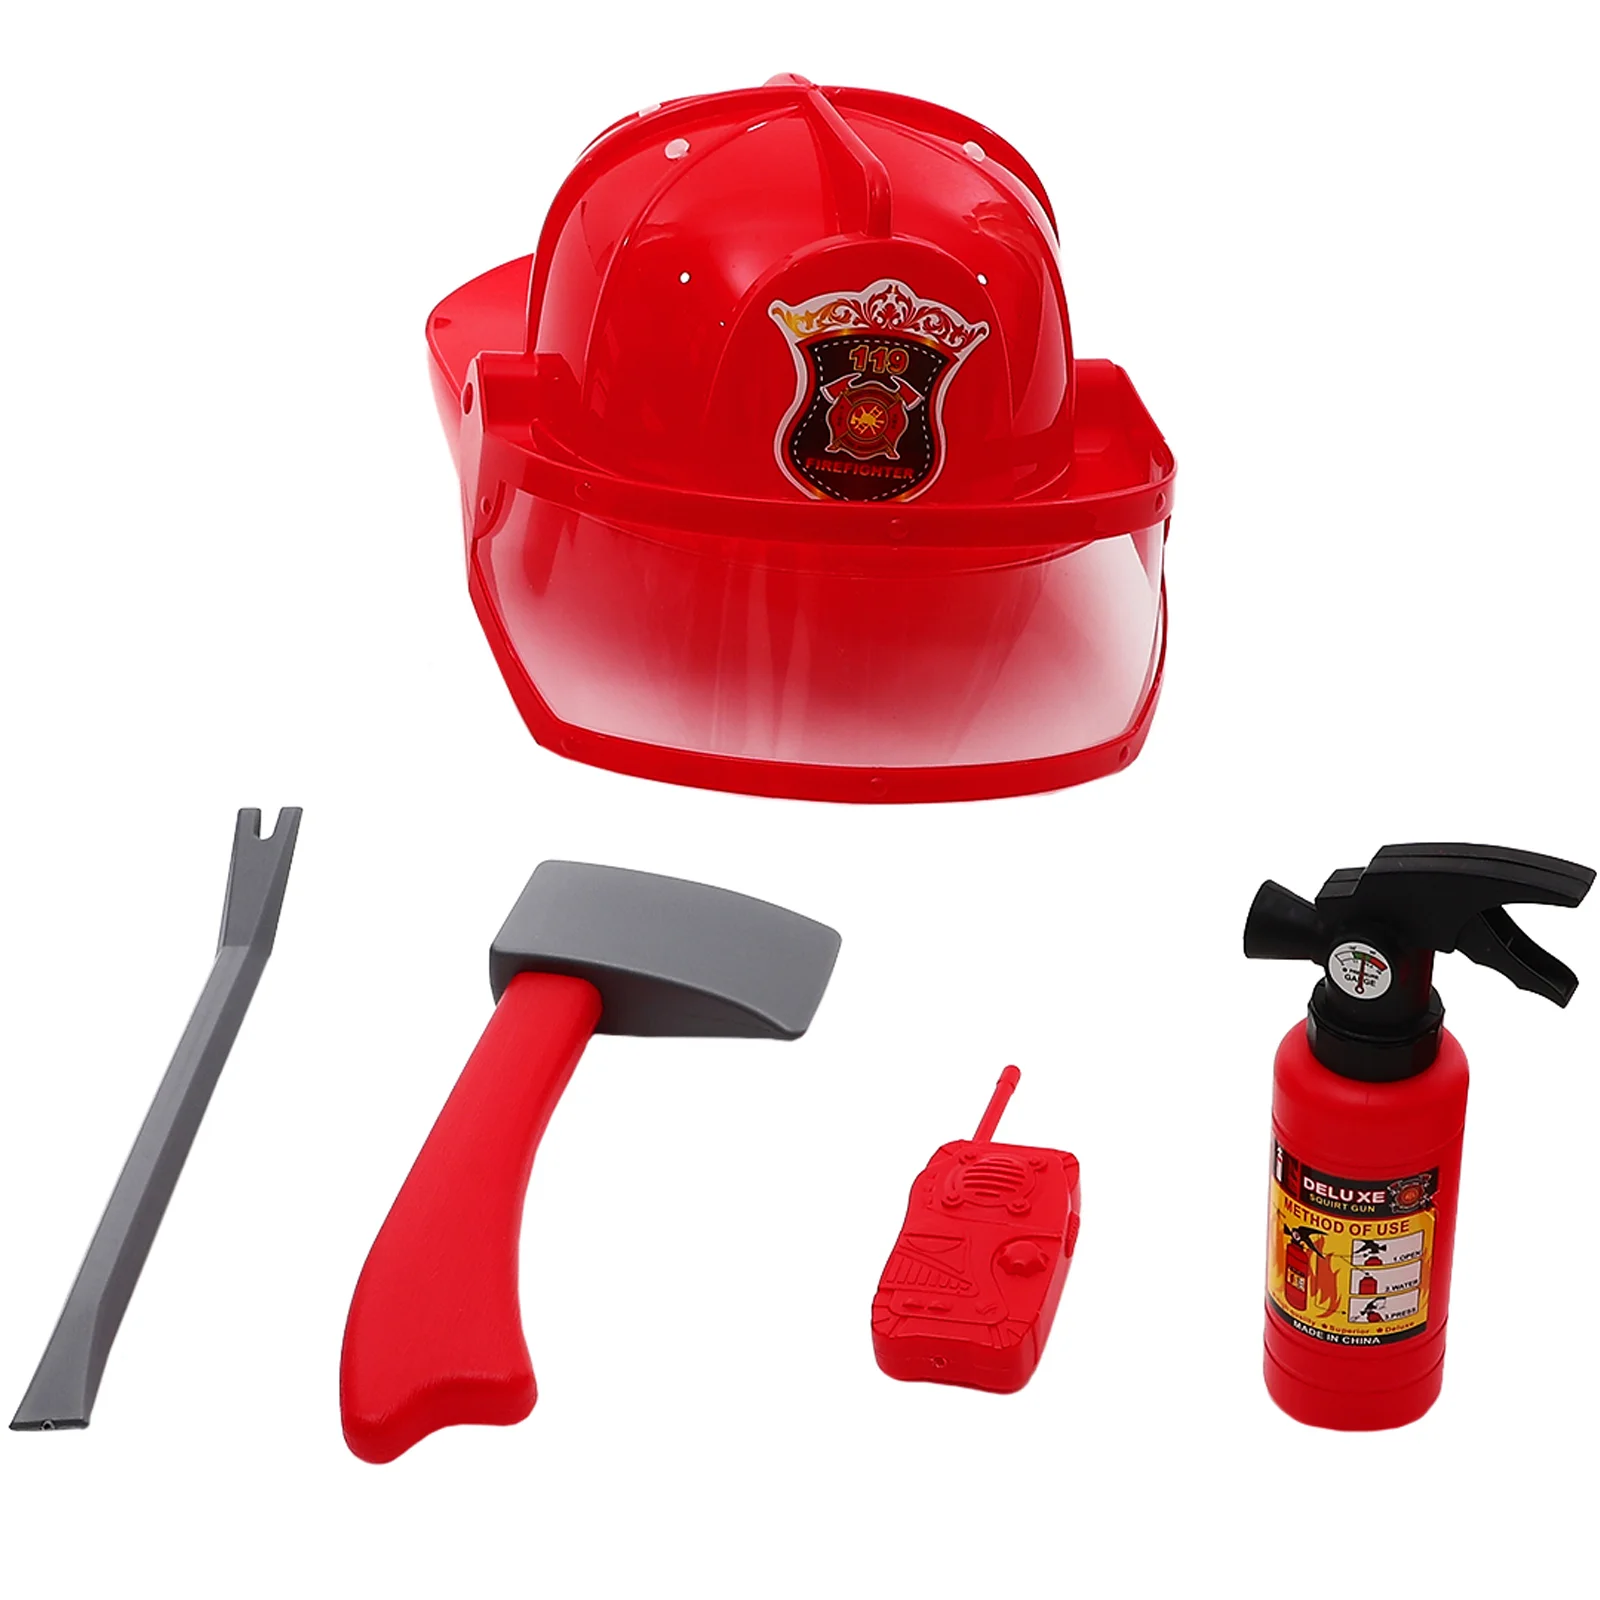 

Fire Accessories Fireman Costume Toddlers Children Firemen Tools Kids Pretend Play Dress Ages 3-5 Cosplay Kit Firefighter Toys